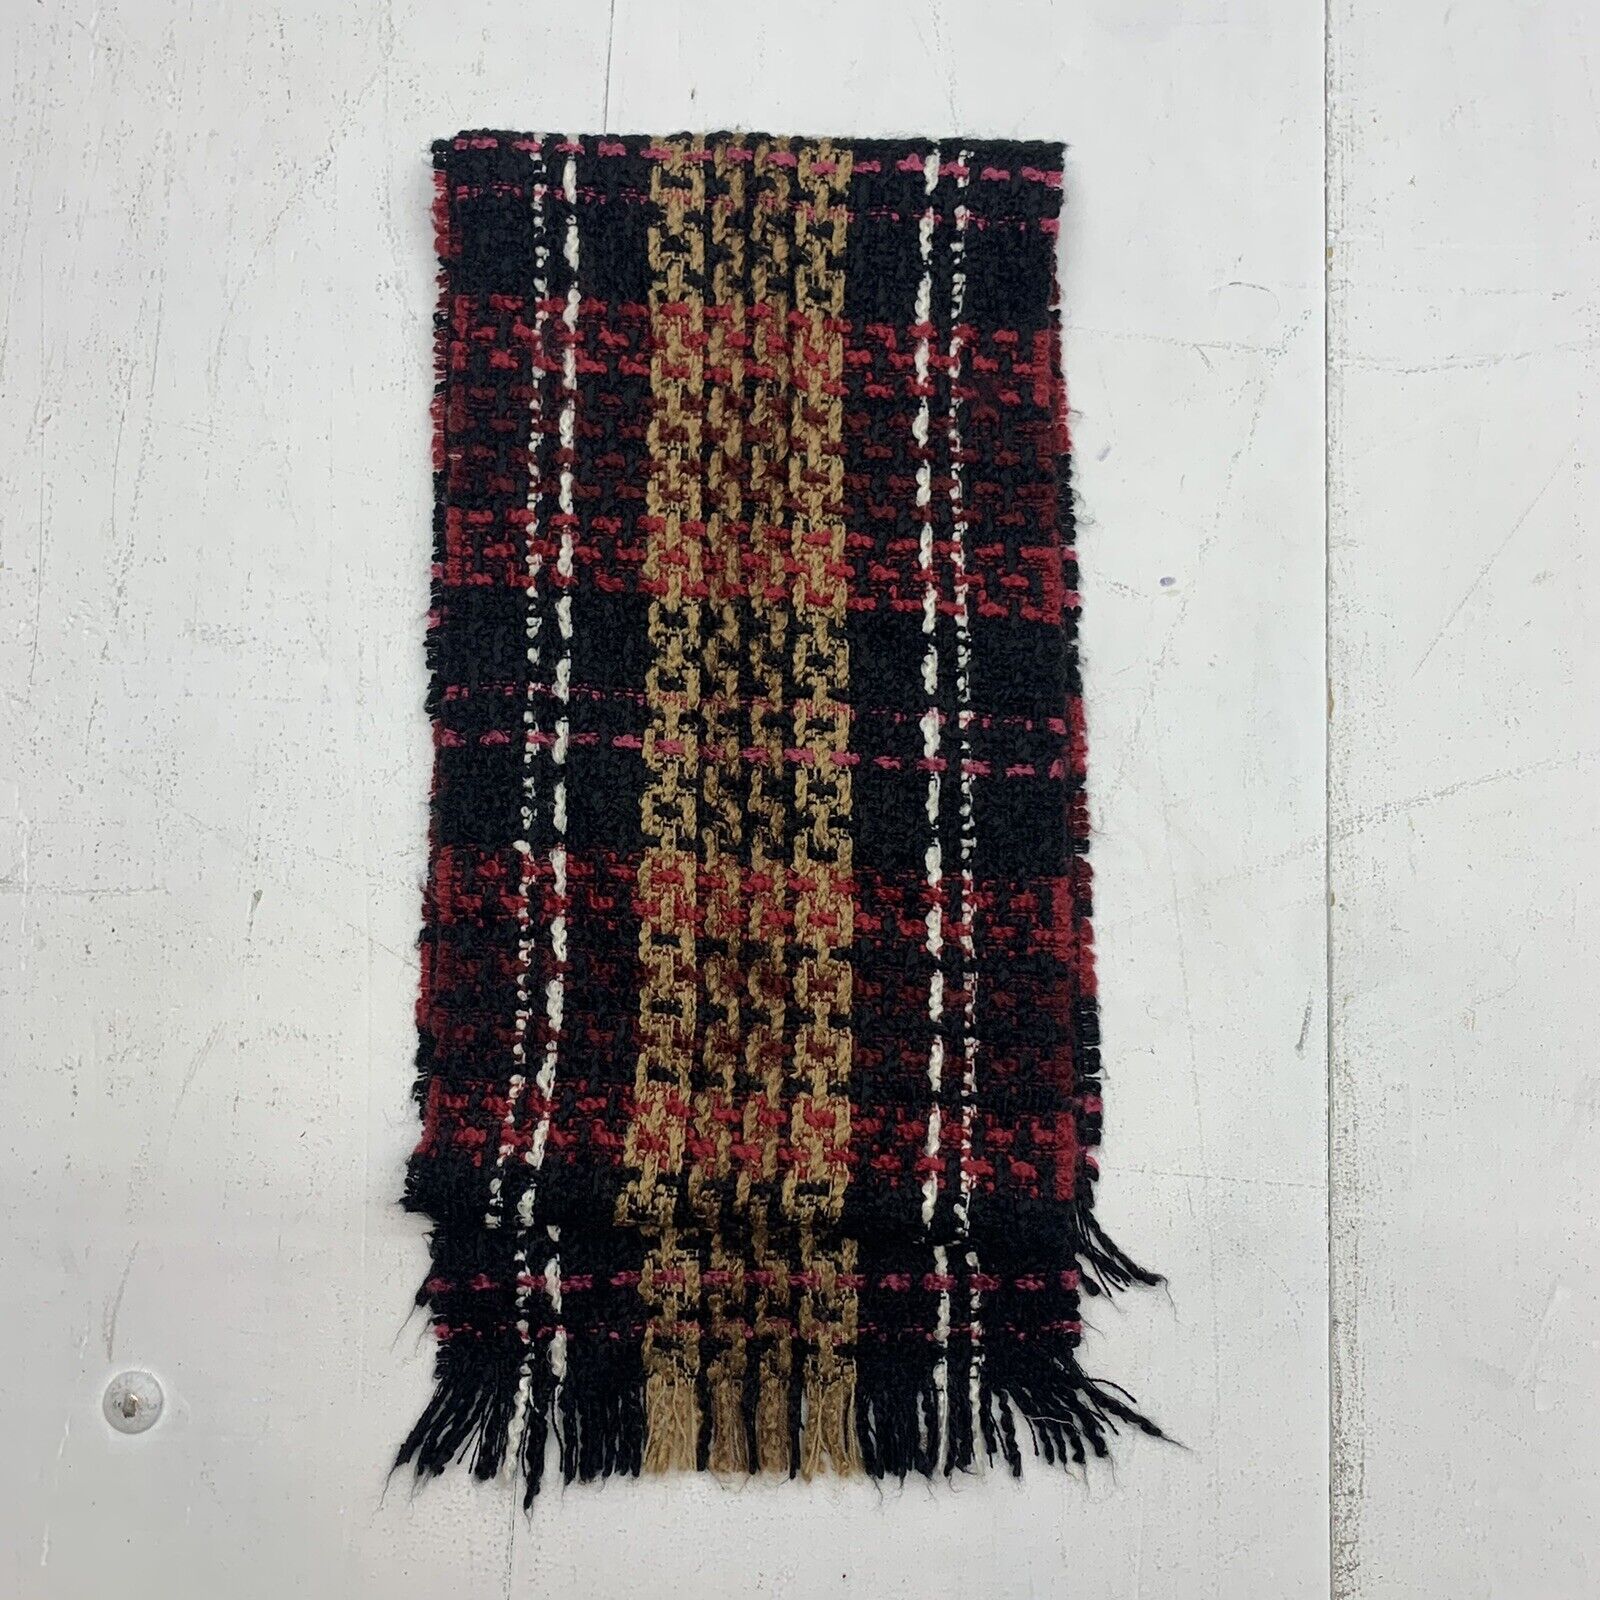 V.Fraas Black Brown Red And White Plaid Knit Scarf*